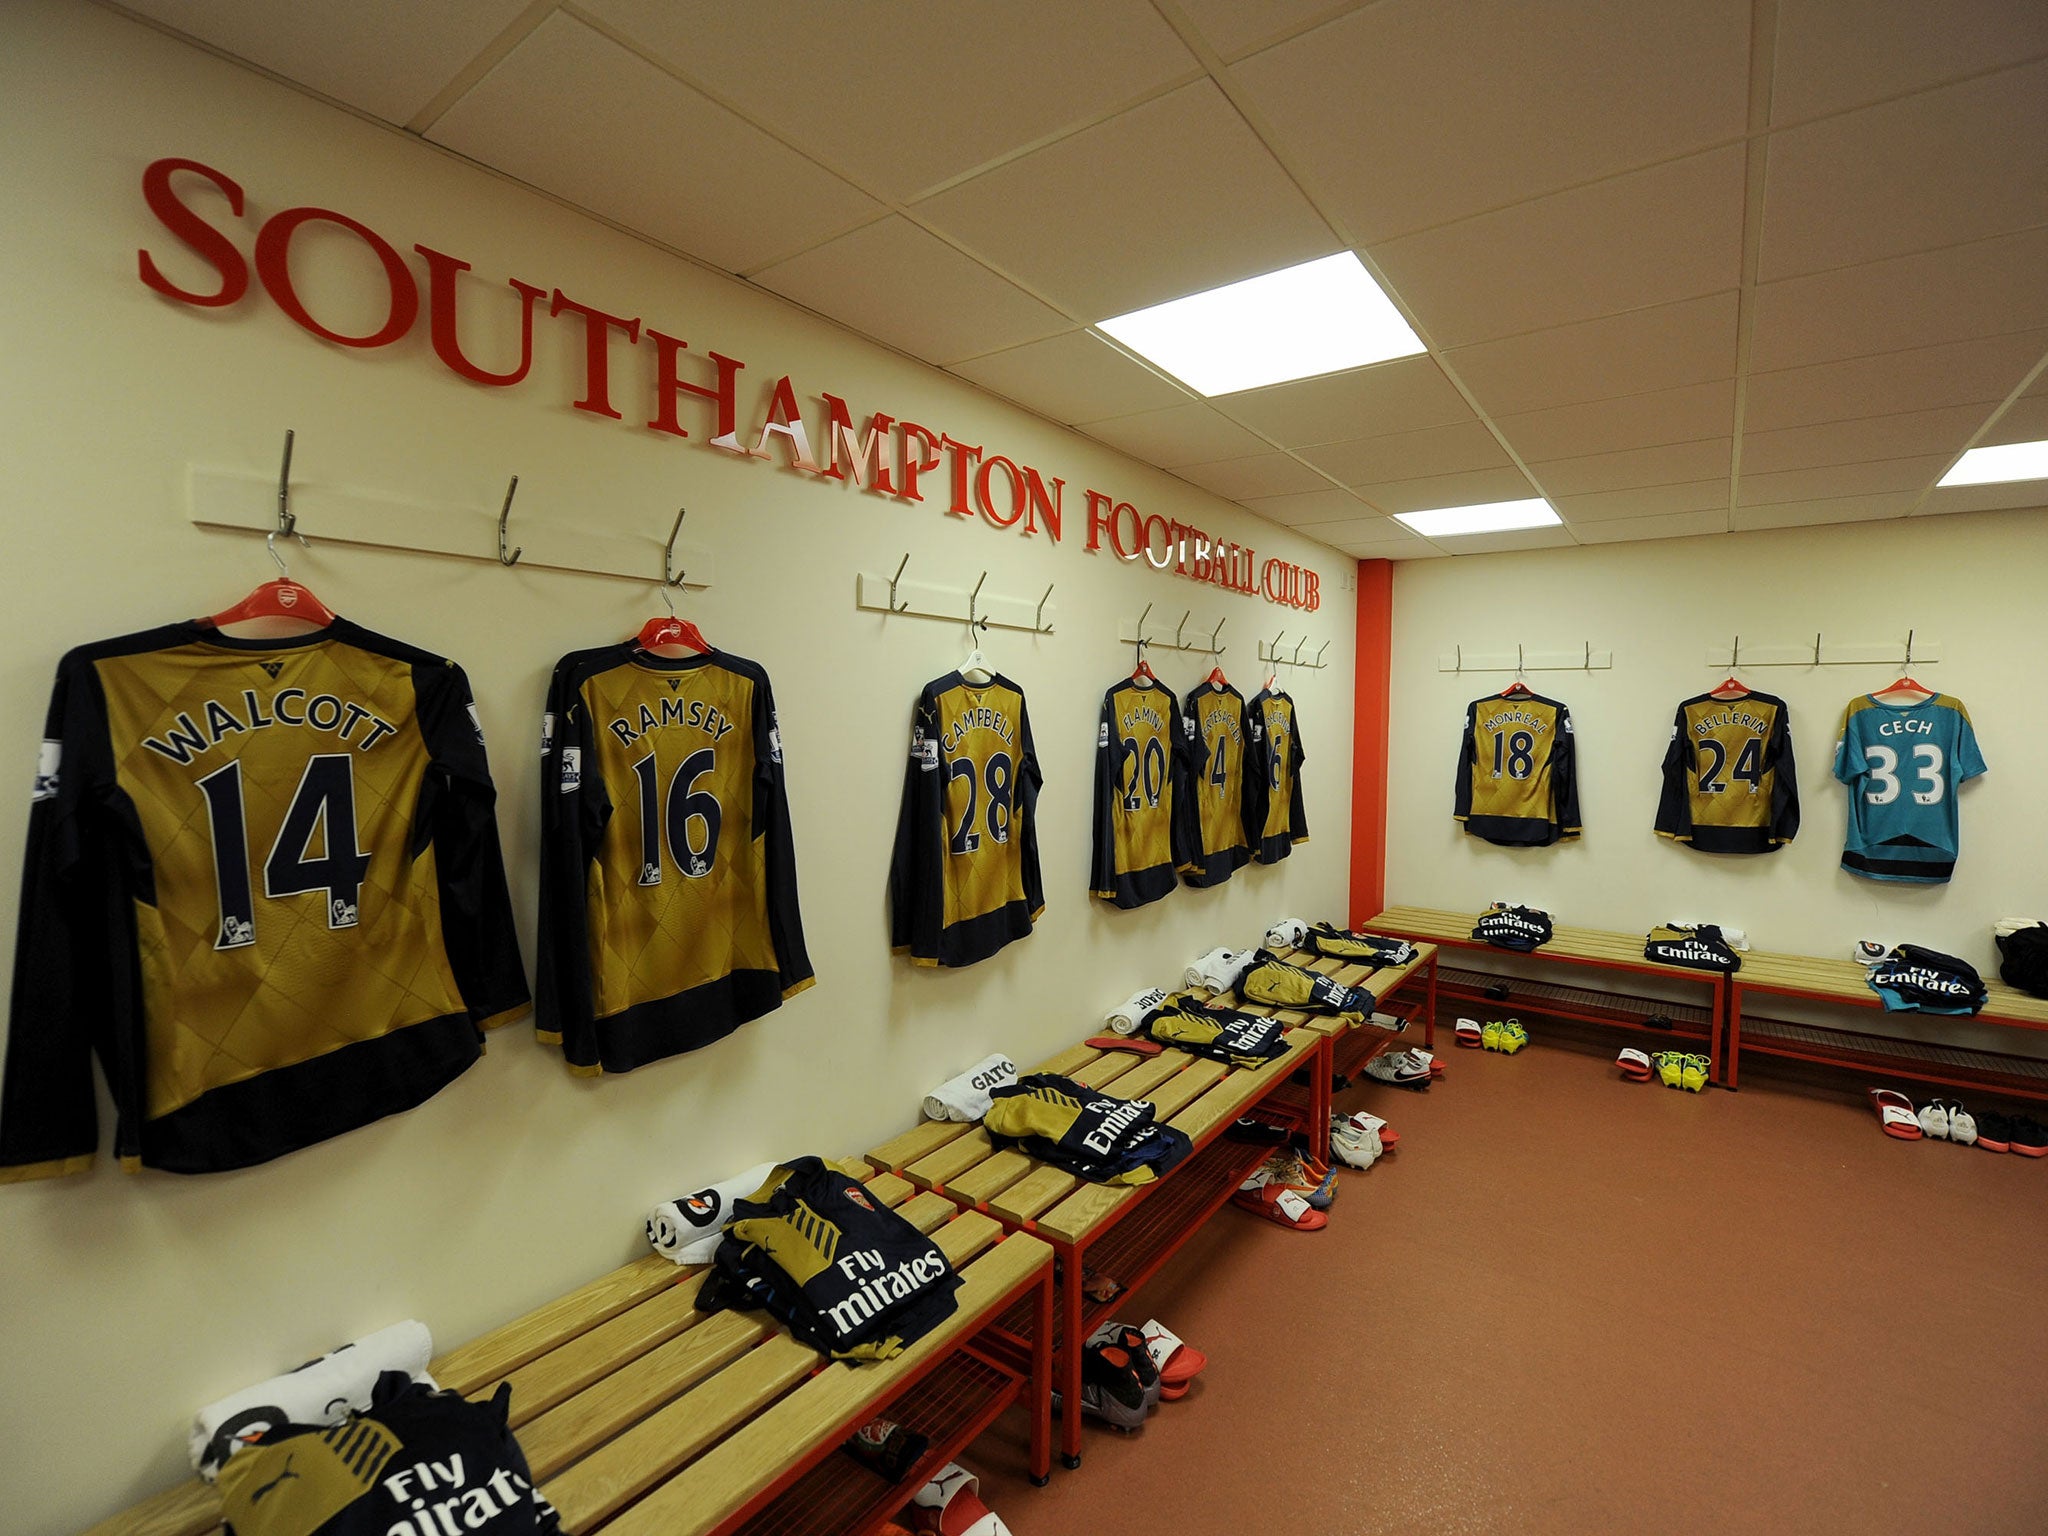 The Arsenal starting line-up shirts are hung up in the changing room at St Mary's